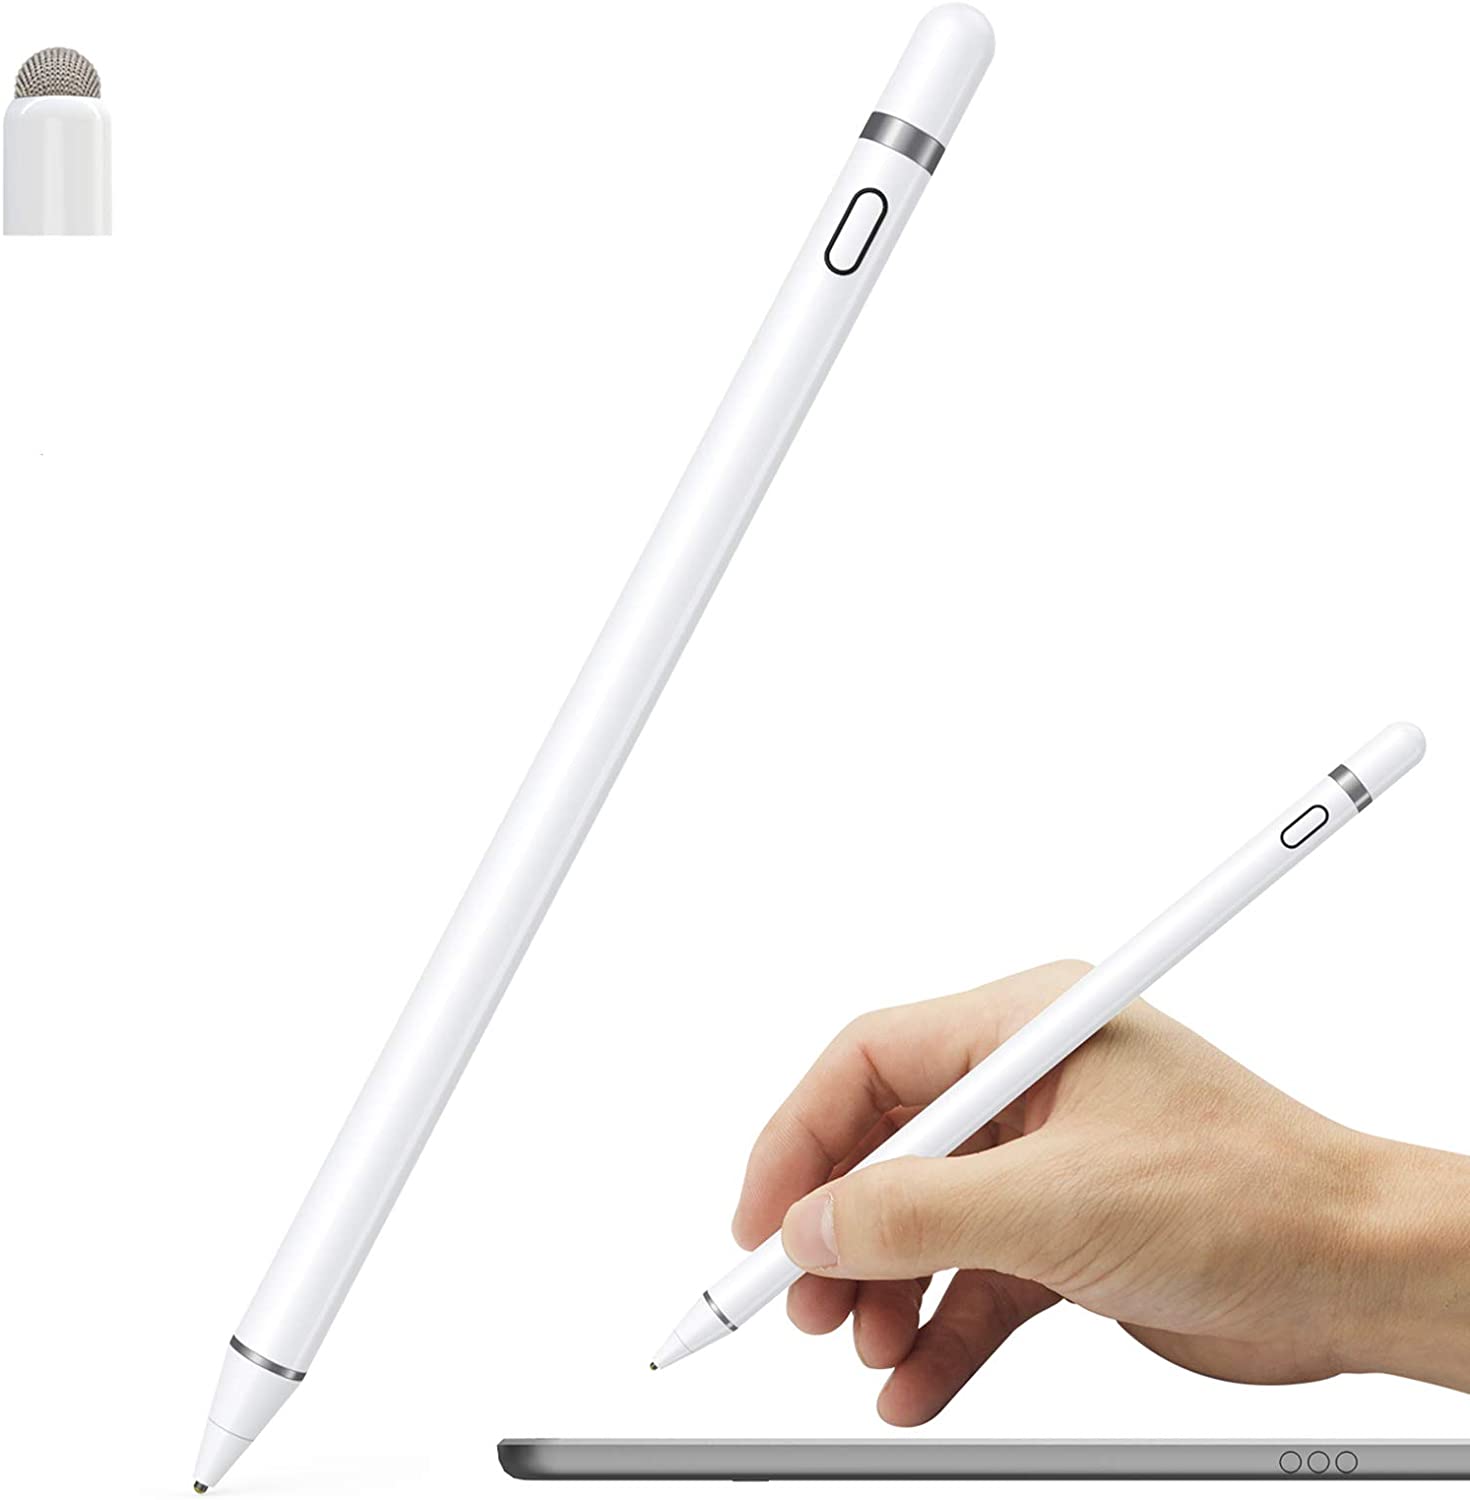 Personlized Products Stylus Pen For Ipad And Iphone - Active Stylus Pen Compatible for iOS&Android Touch Screens, Pencil for iPad with Dual Touch Function,Rechargeable Stylus for iPad/iPad Pro...